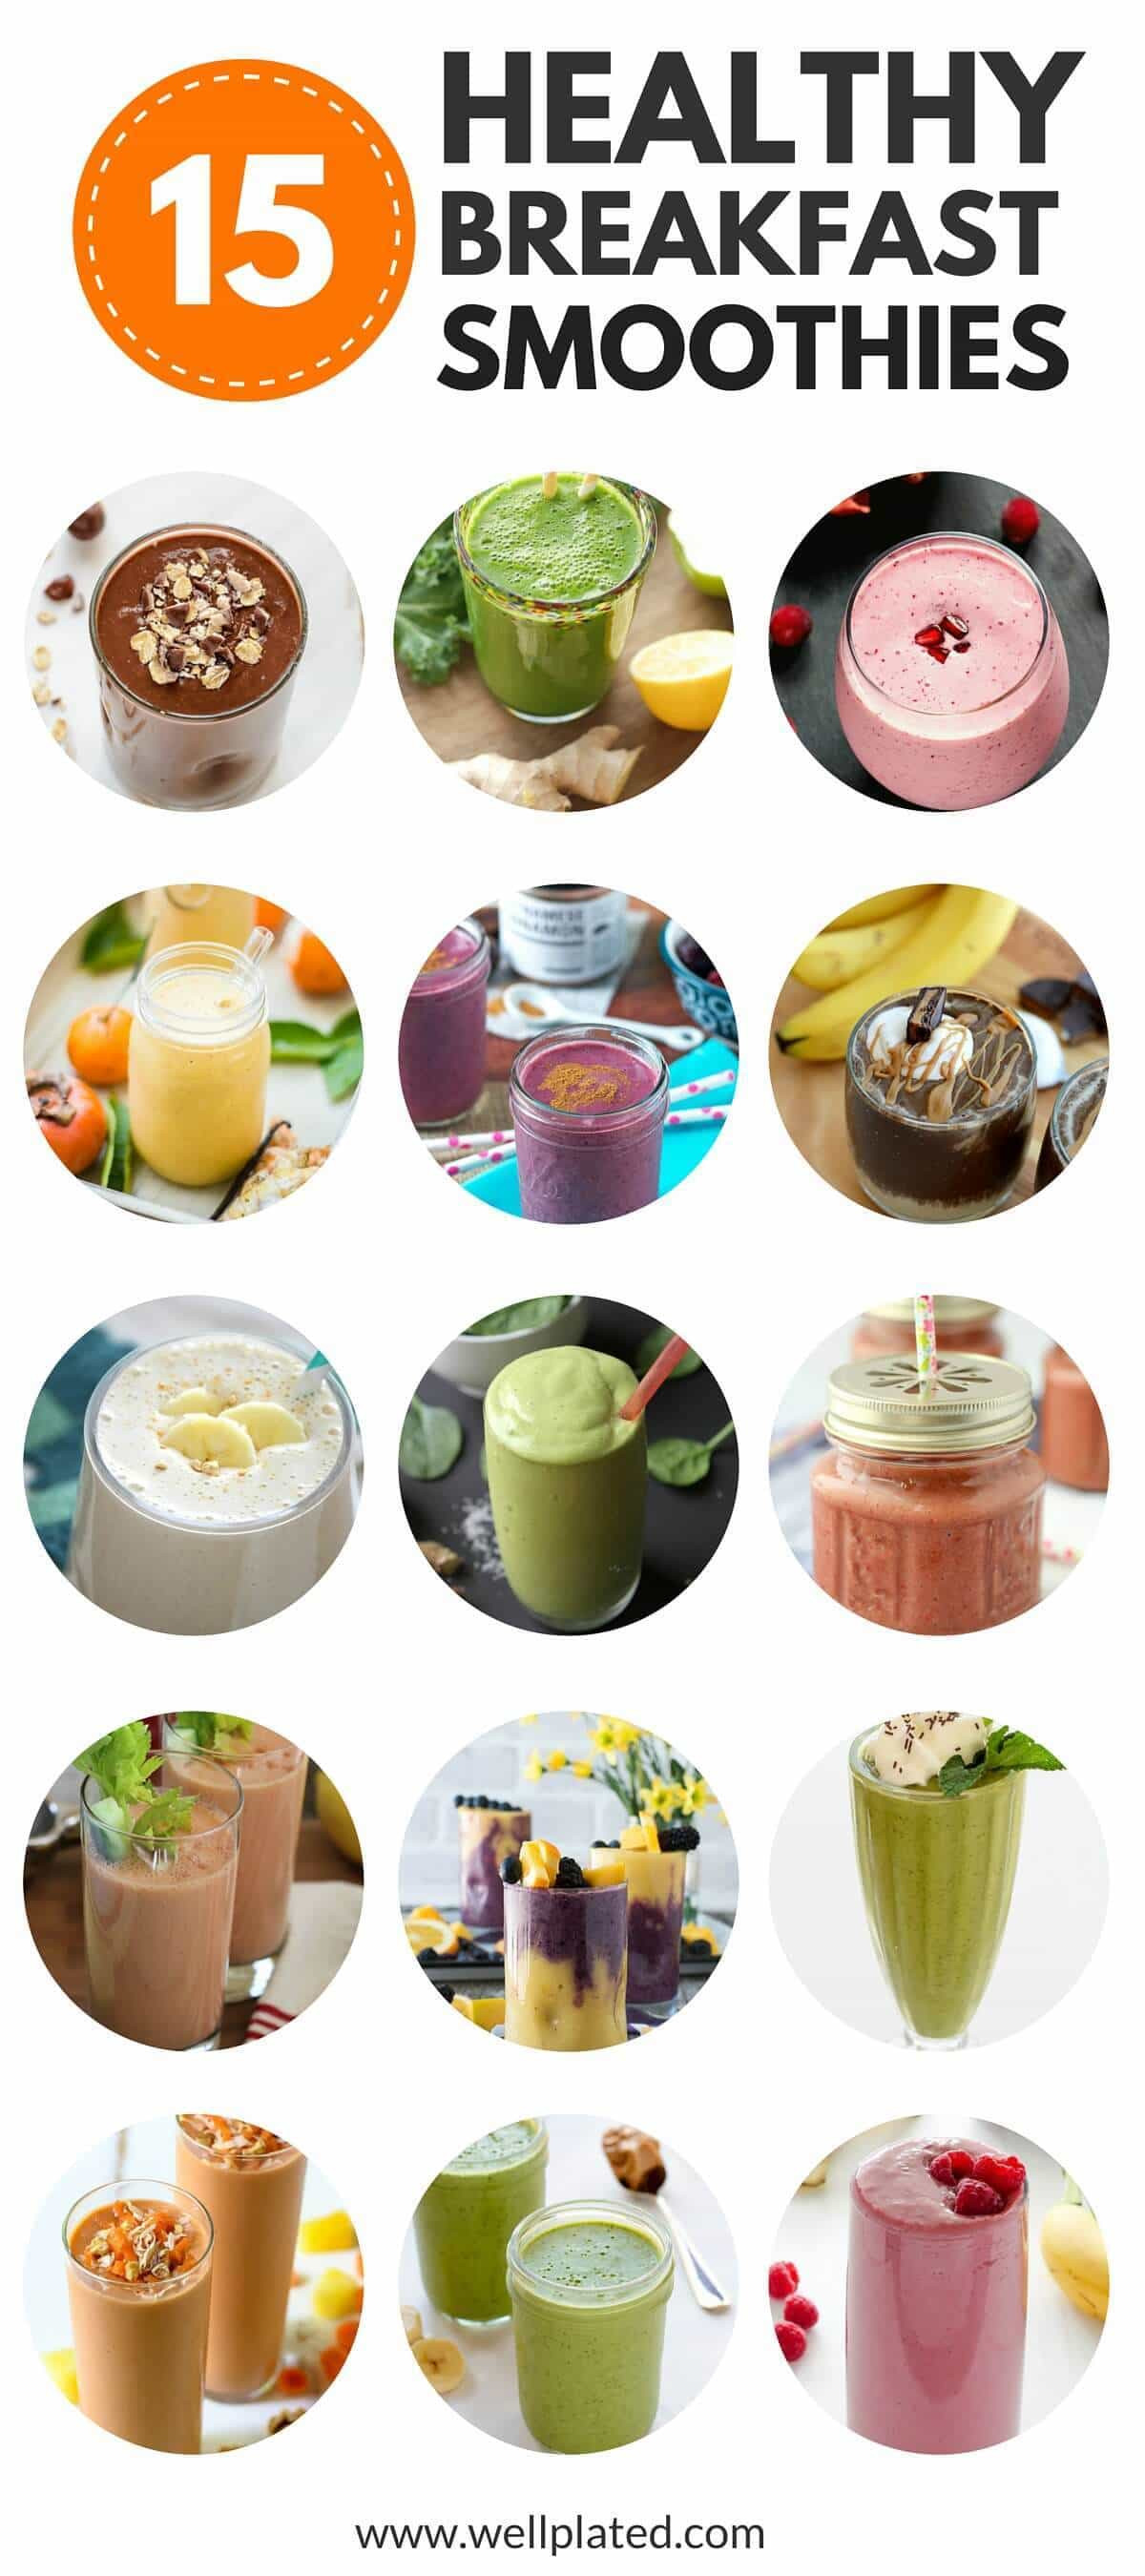 Are Fruit Smoothies Healthy For Breakfast
 The Best 15 Healthy Breakfast Smoothies